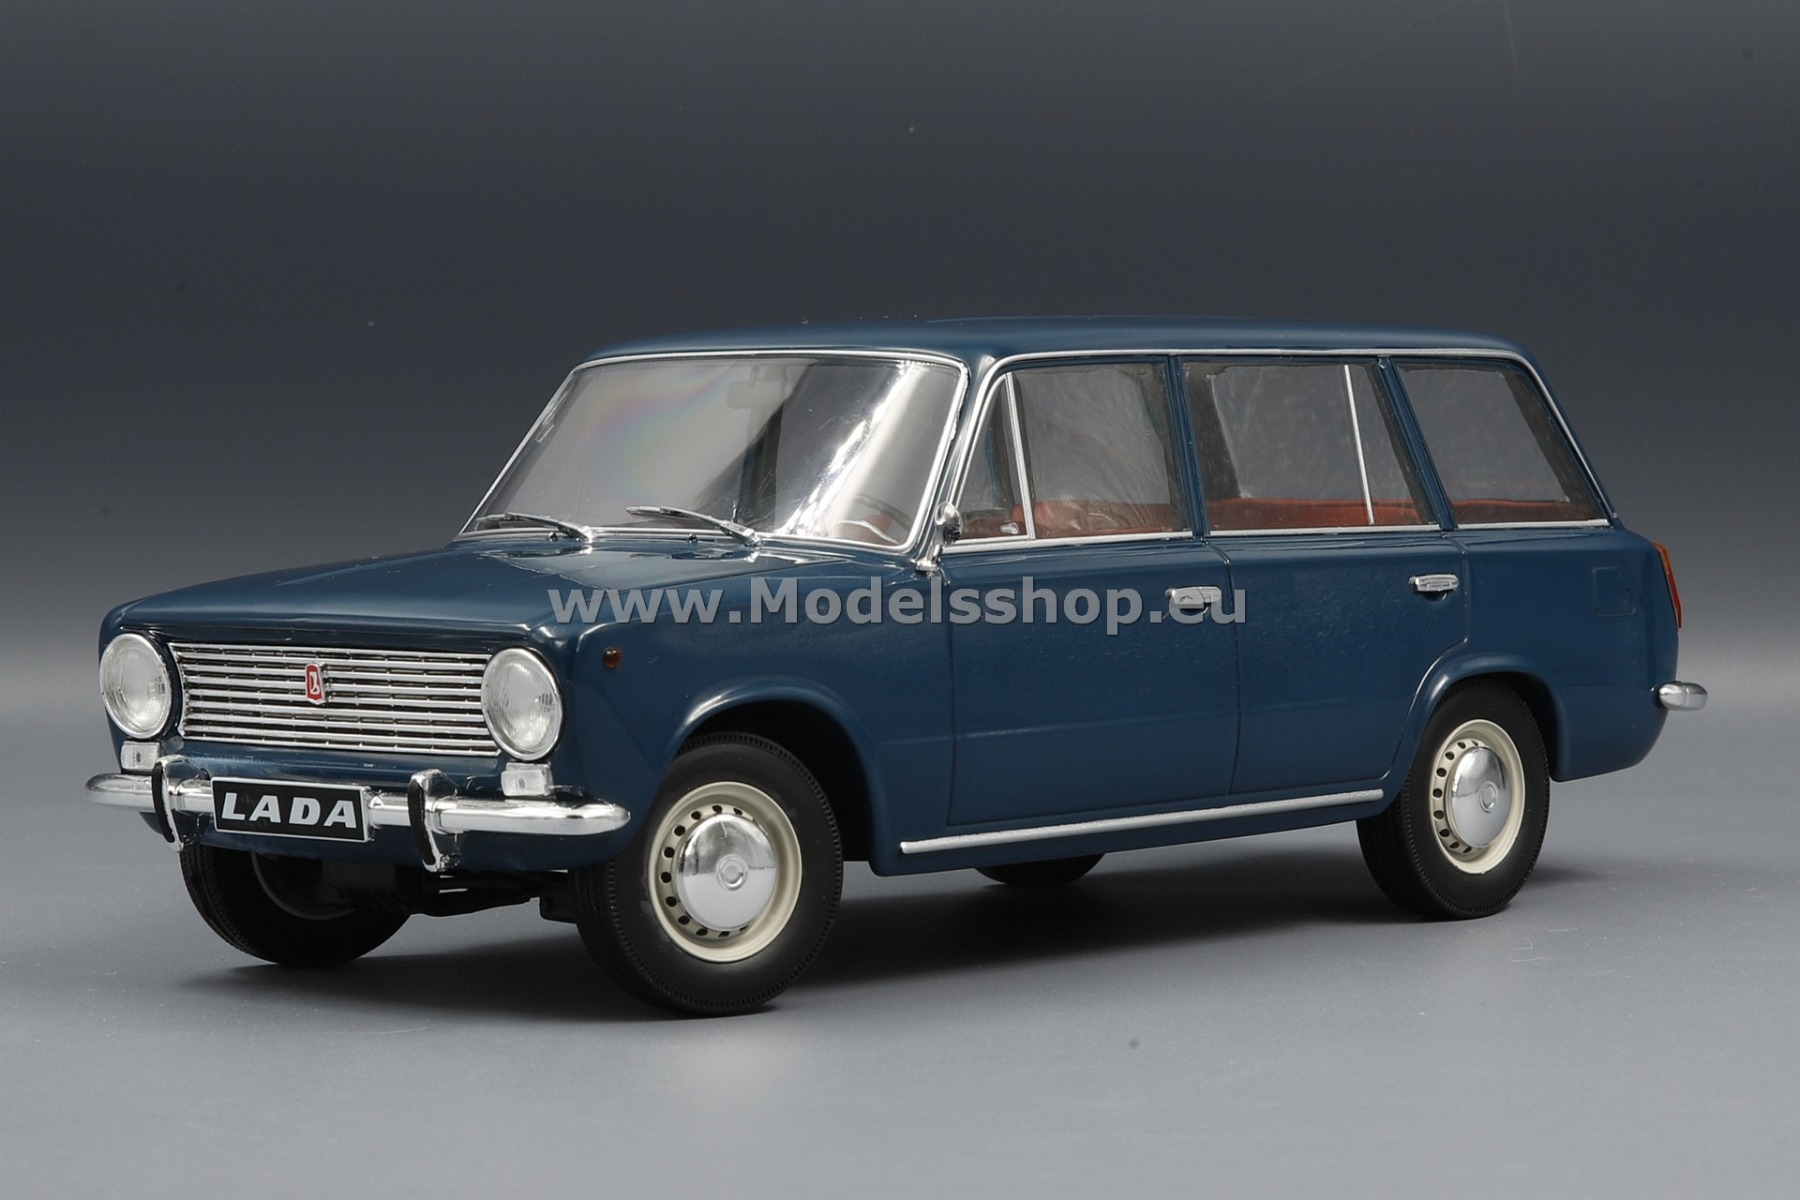 Lada / VAZ 2102, 1970a /blue with red interior/